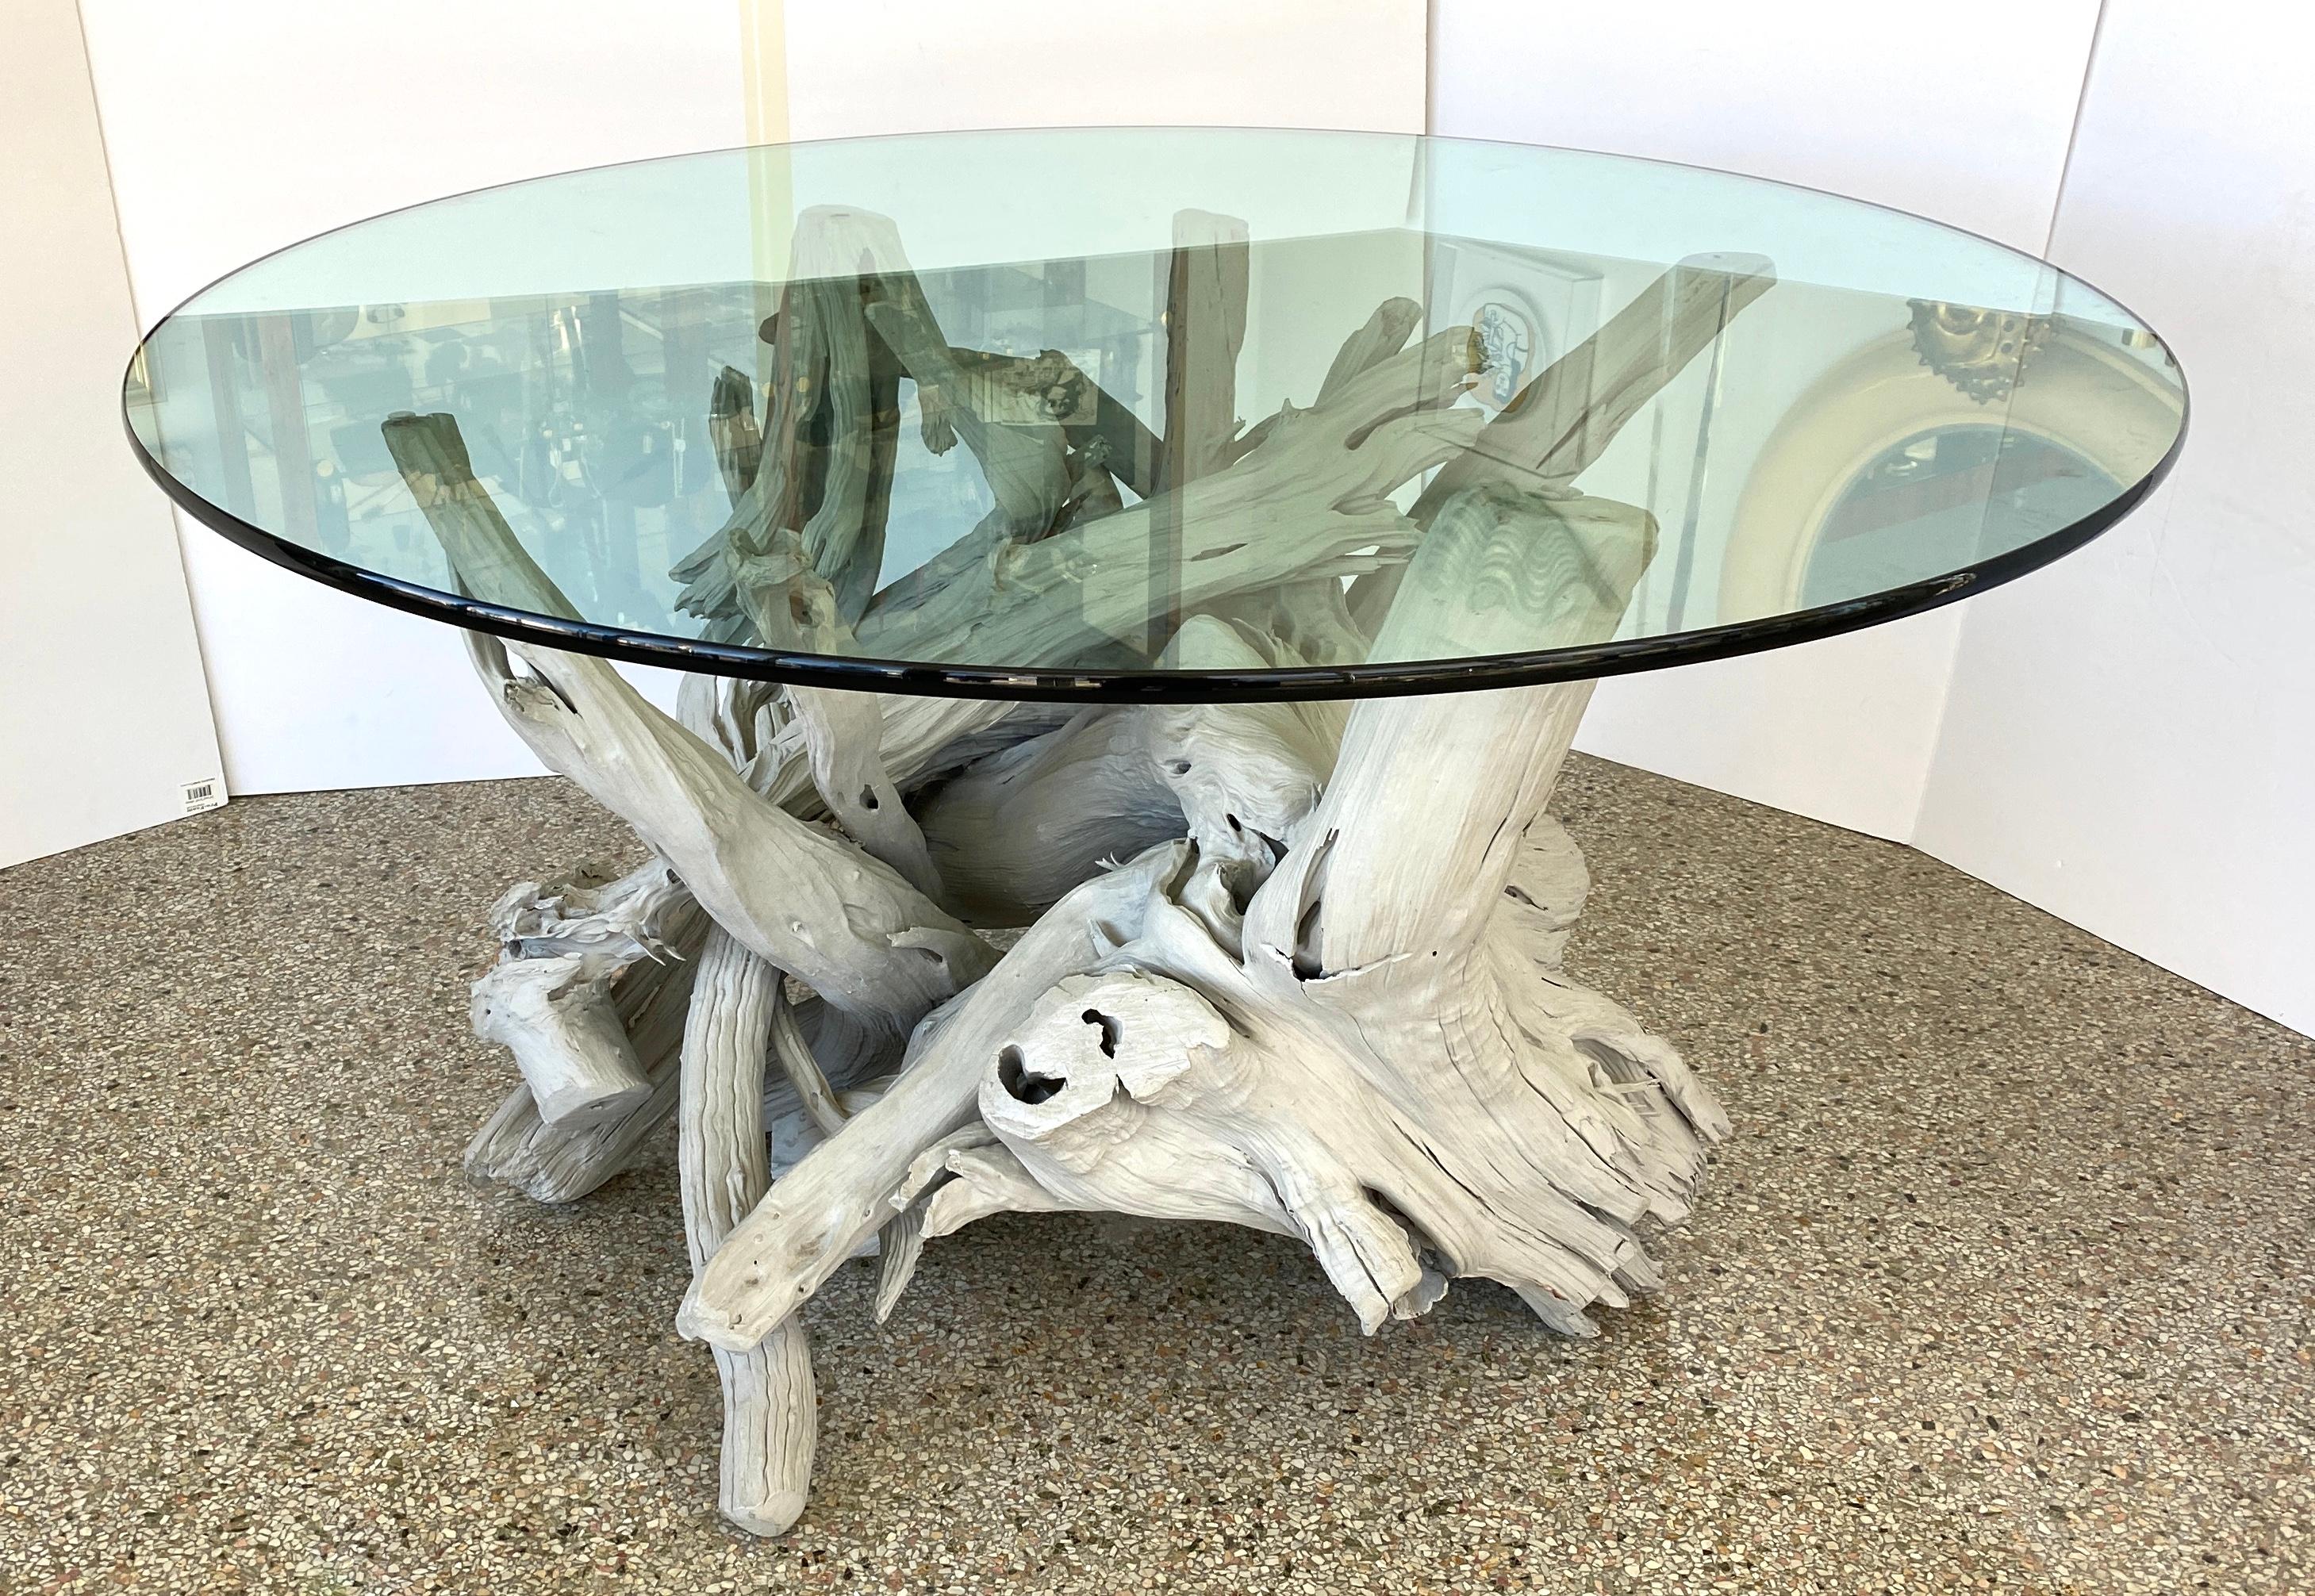 This stylish and chic driftwood table with its light-grey wash will make a subtle statement with its form, coloration and large scale. 

Note: The glass is .75